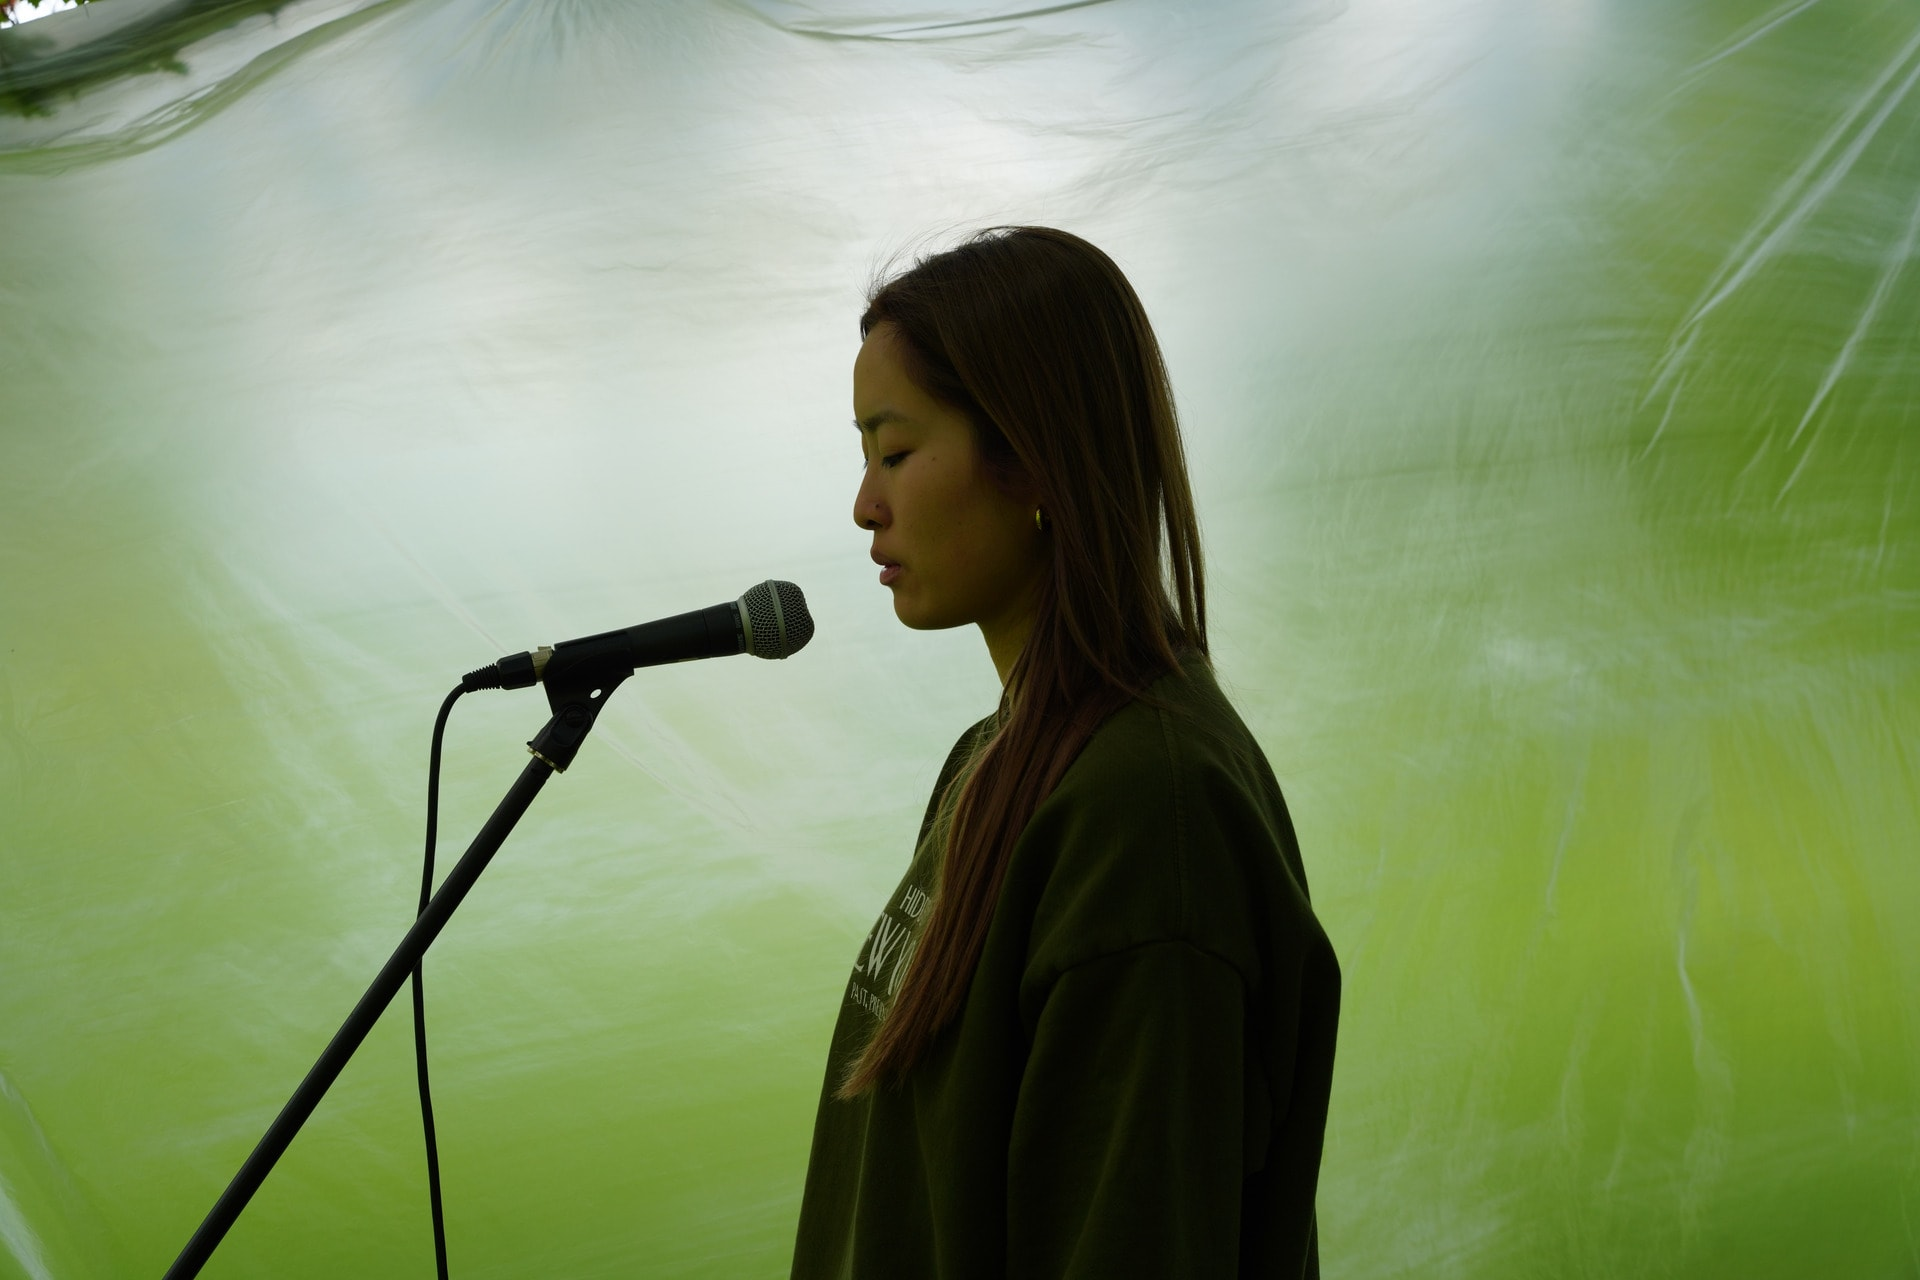 Photograph of a woman from the waist up, in profile, with her eyes closed, stood in front of a microphone on a stand, against a green background.